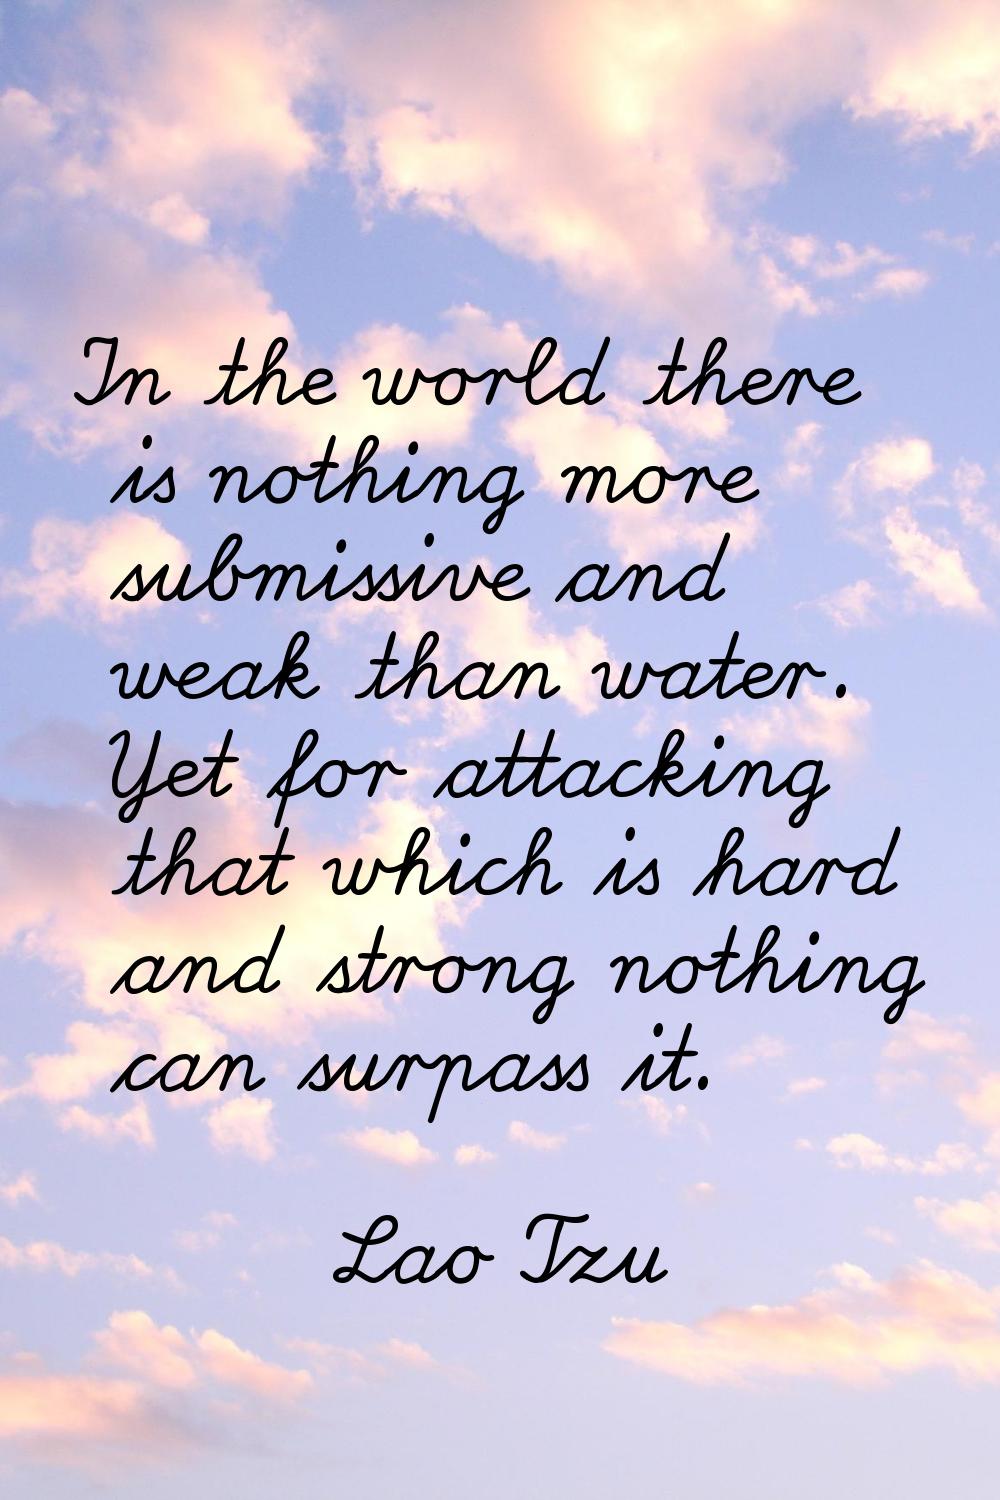 In the world there is nothing more submissive and weak than water. Yet for attacking that which is 